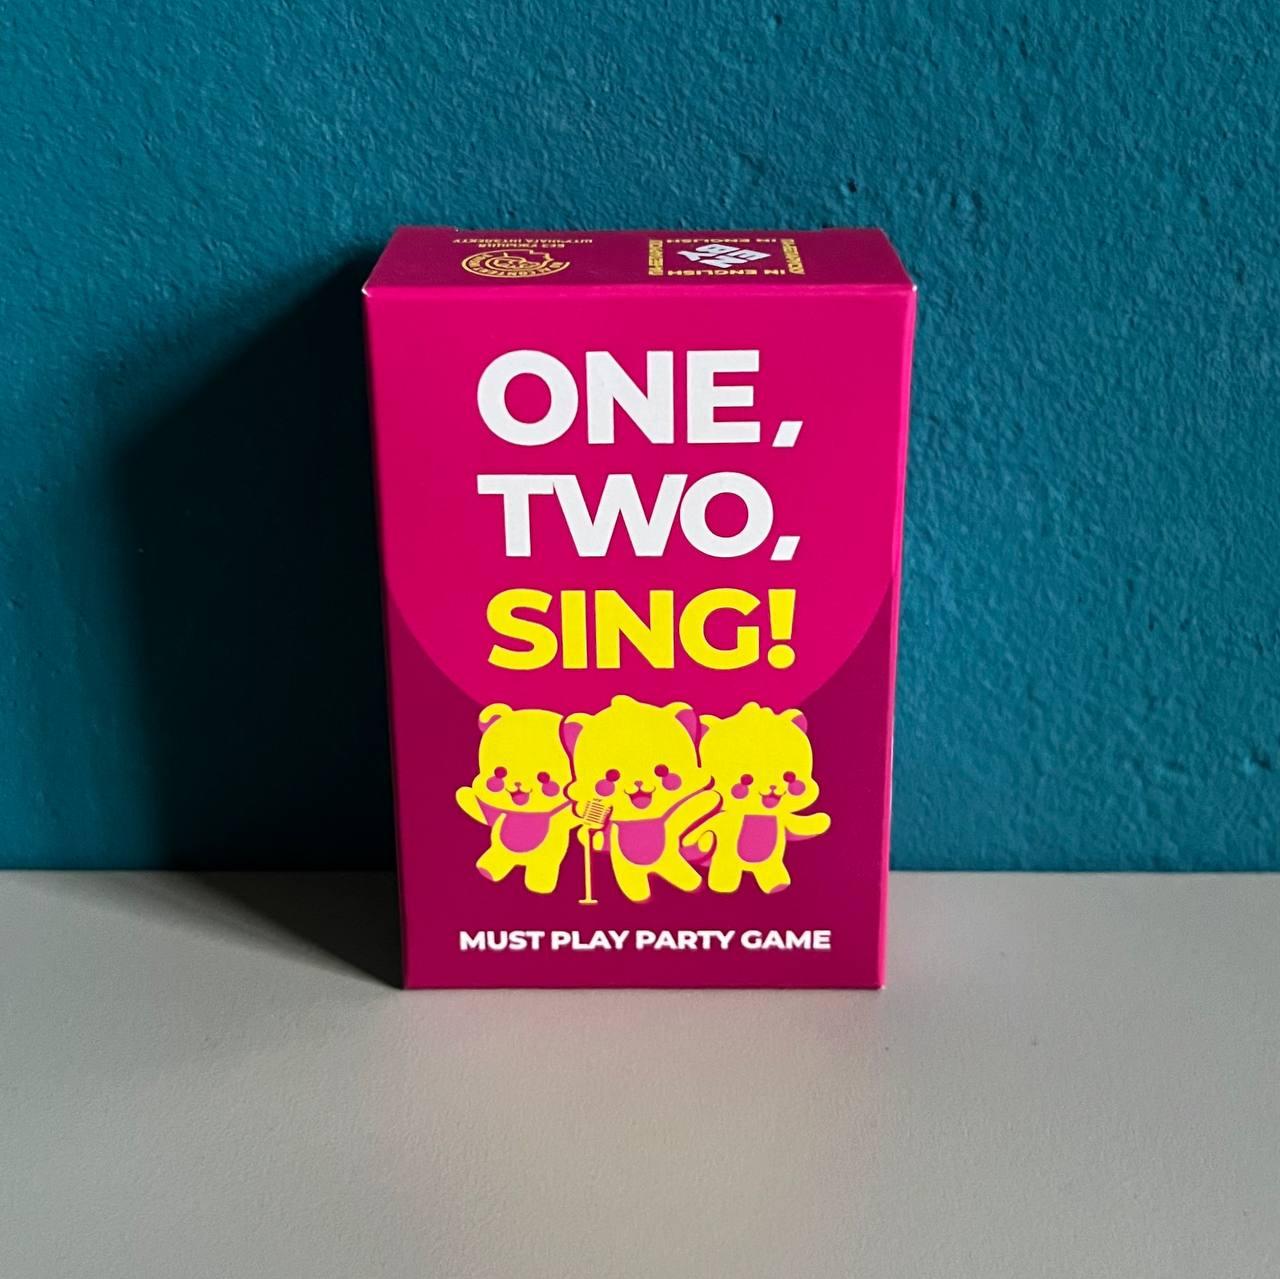 Image for One, two, sing! Must play party game